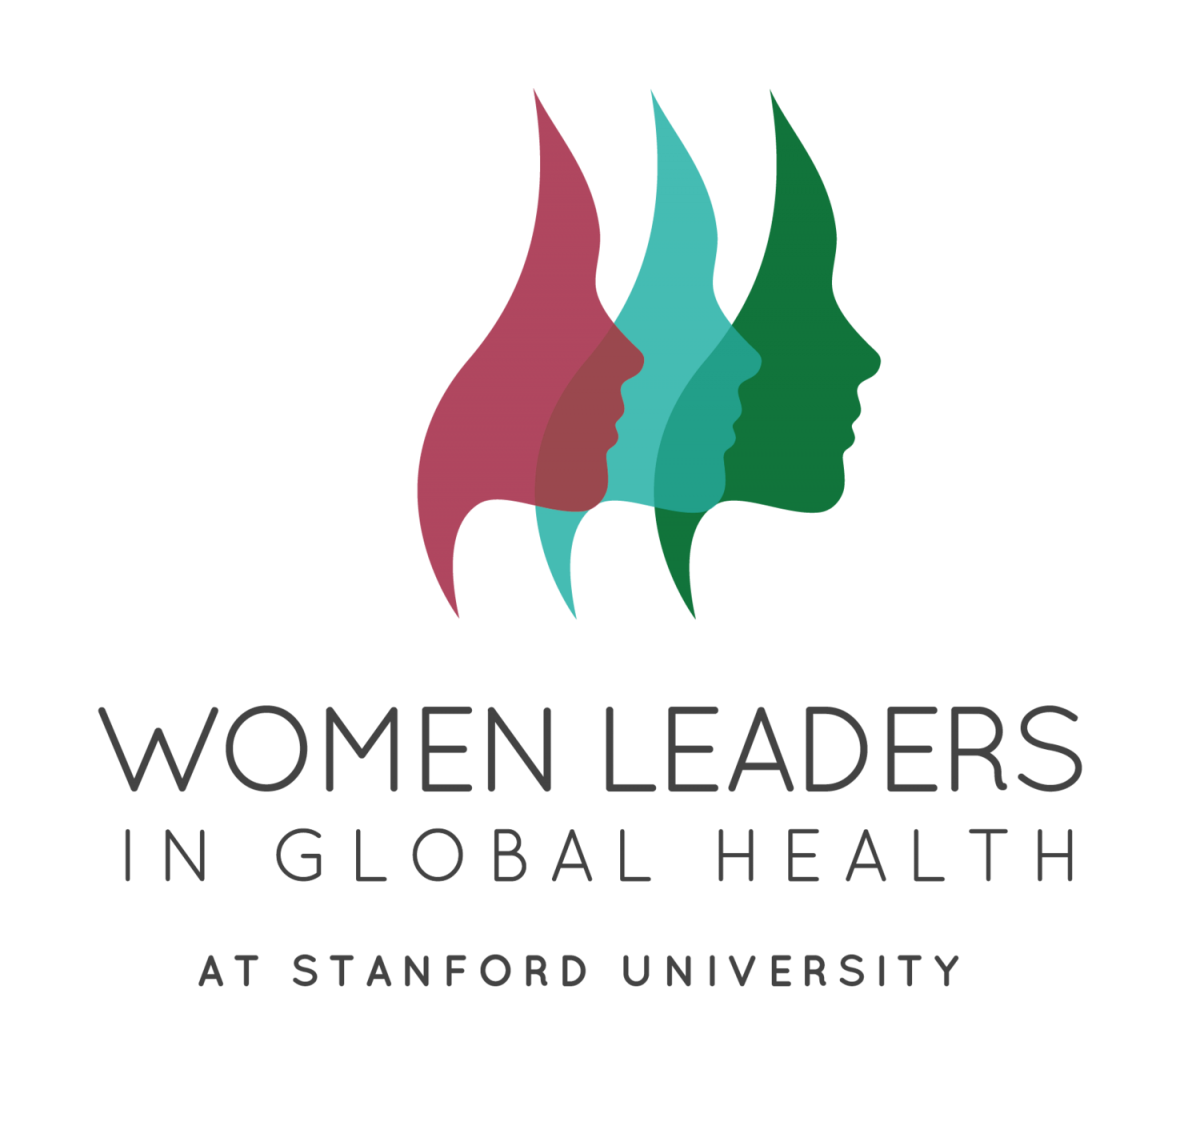 Women Leaders in Global Health Conference logo